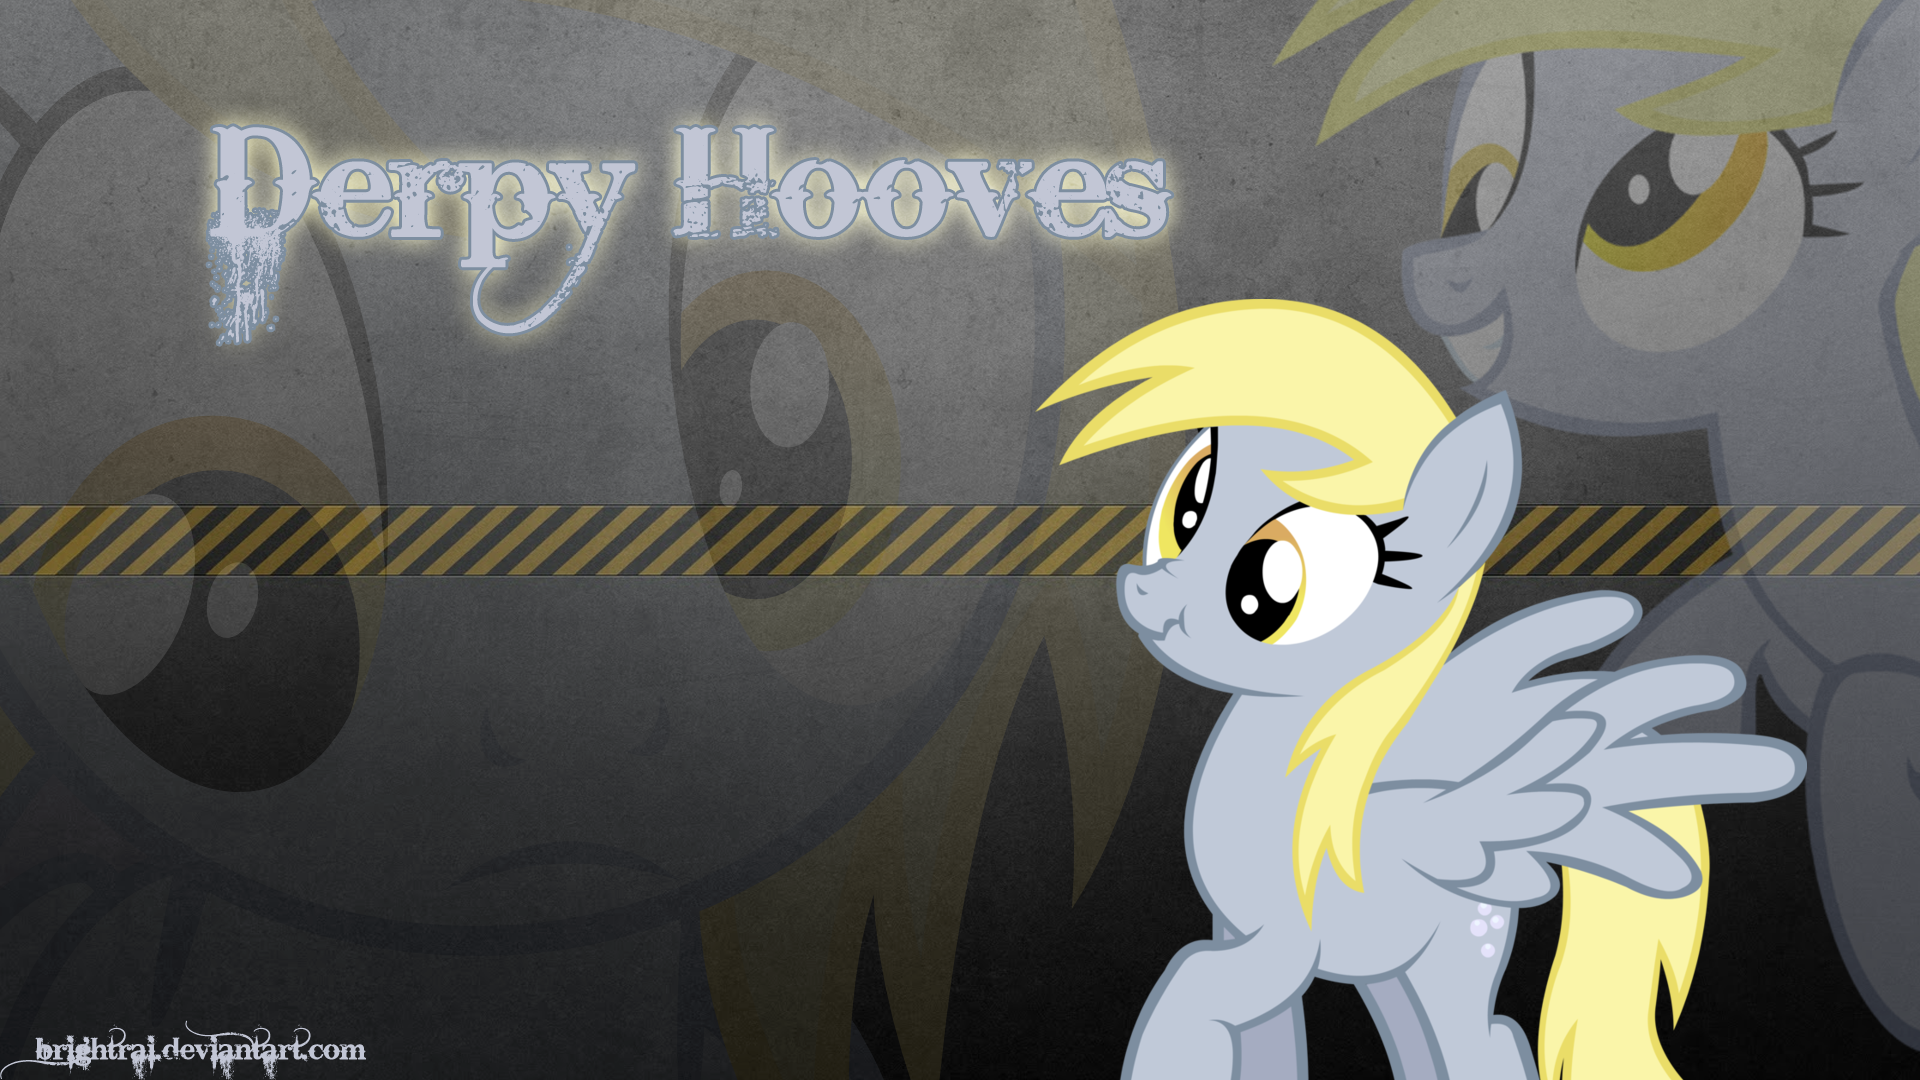 Derpy Hooves Wallpaper by brightrai